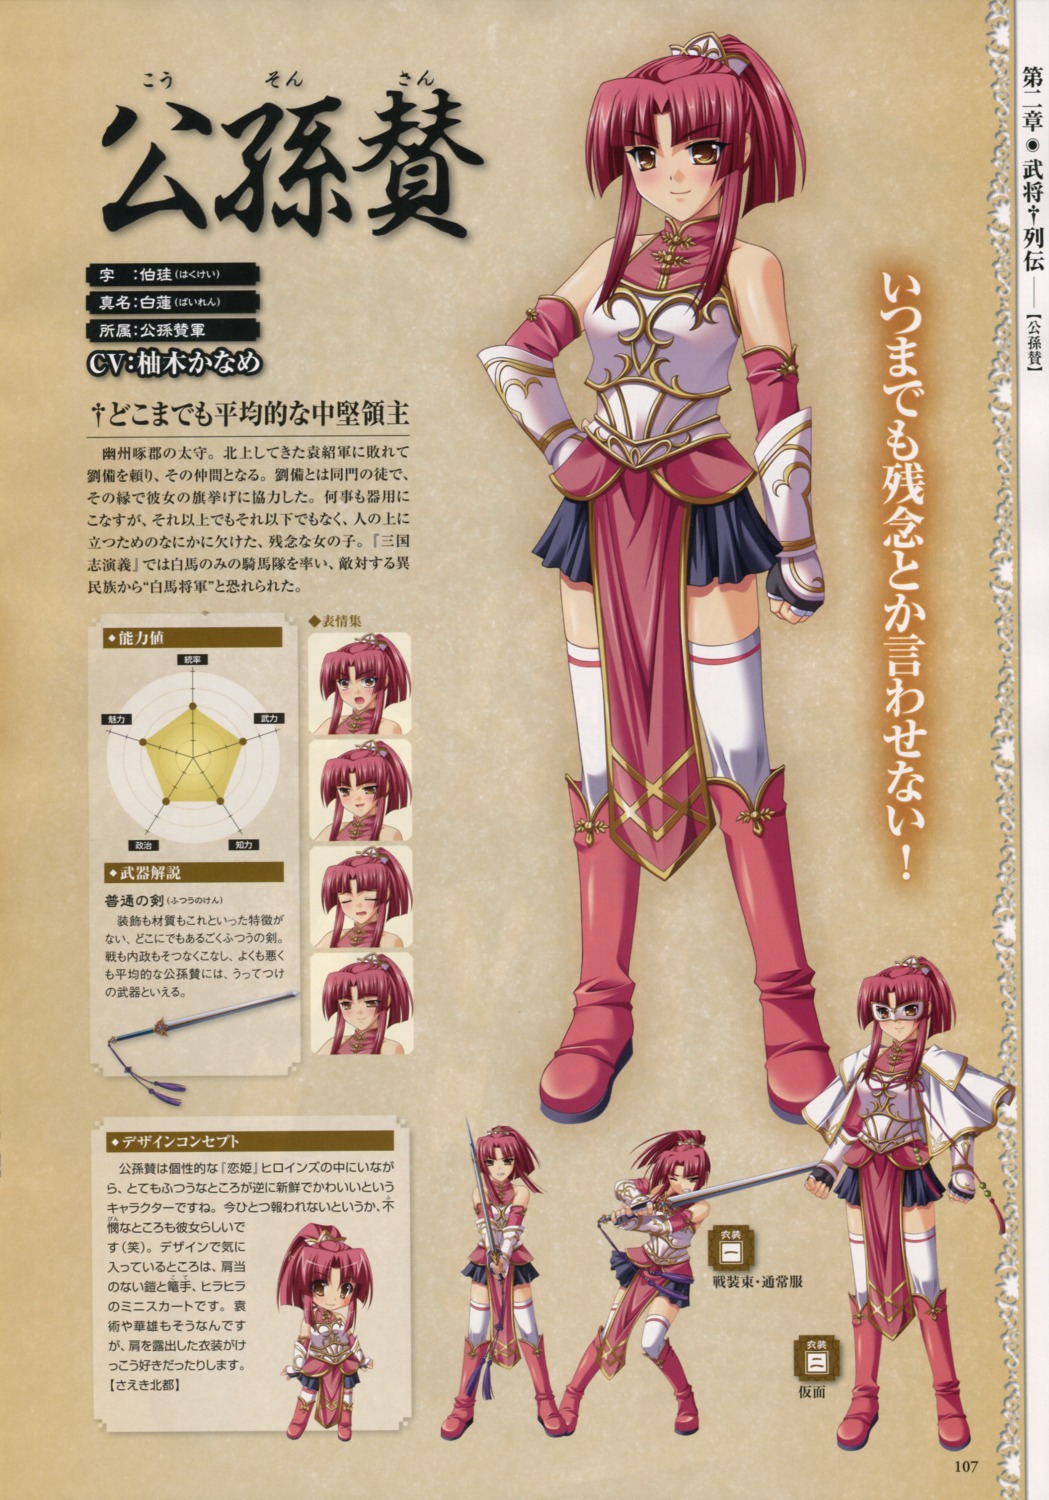 asian_clothes baseson character_design chibi expression koihime_musou kousonsan profile_page sword thighhighs